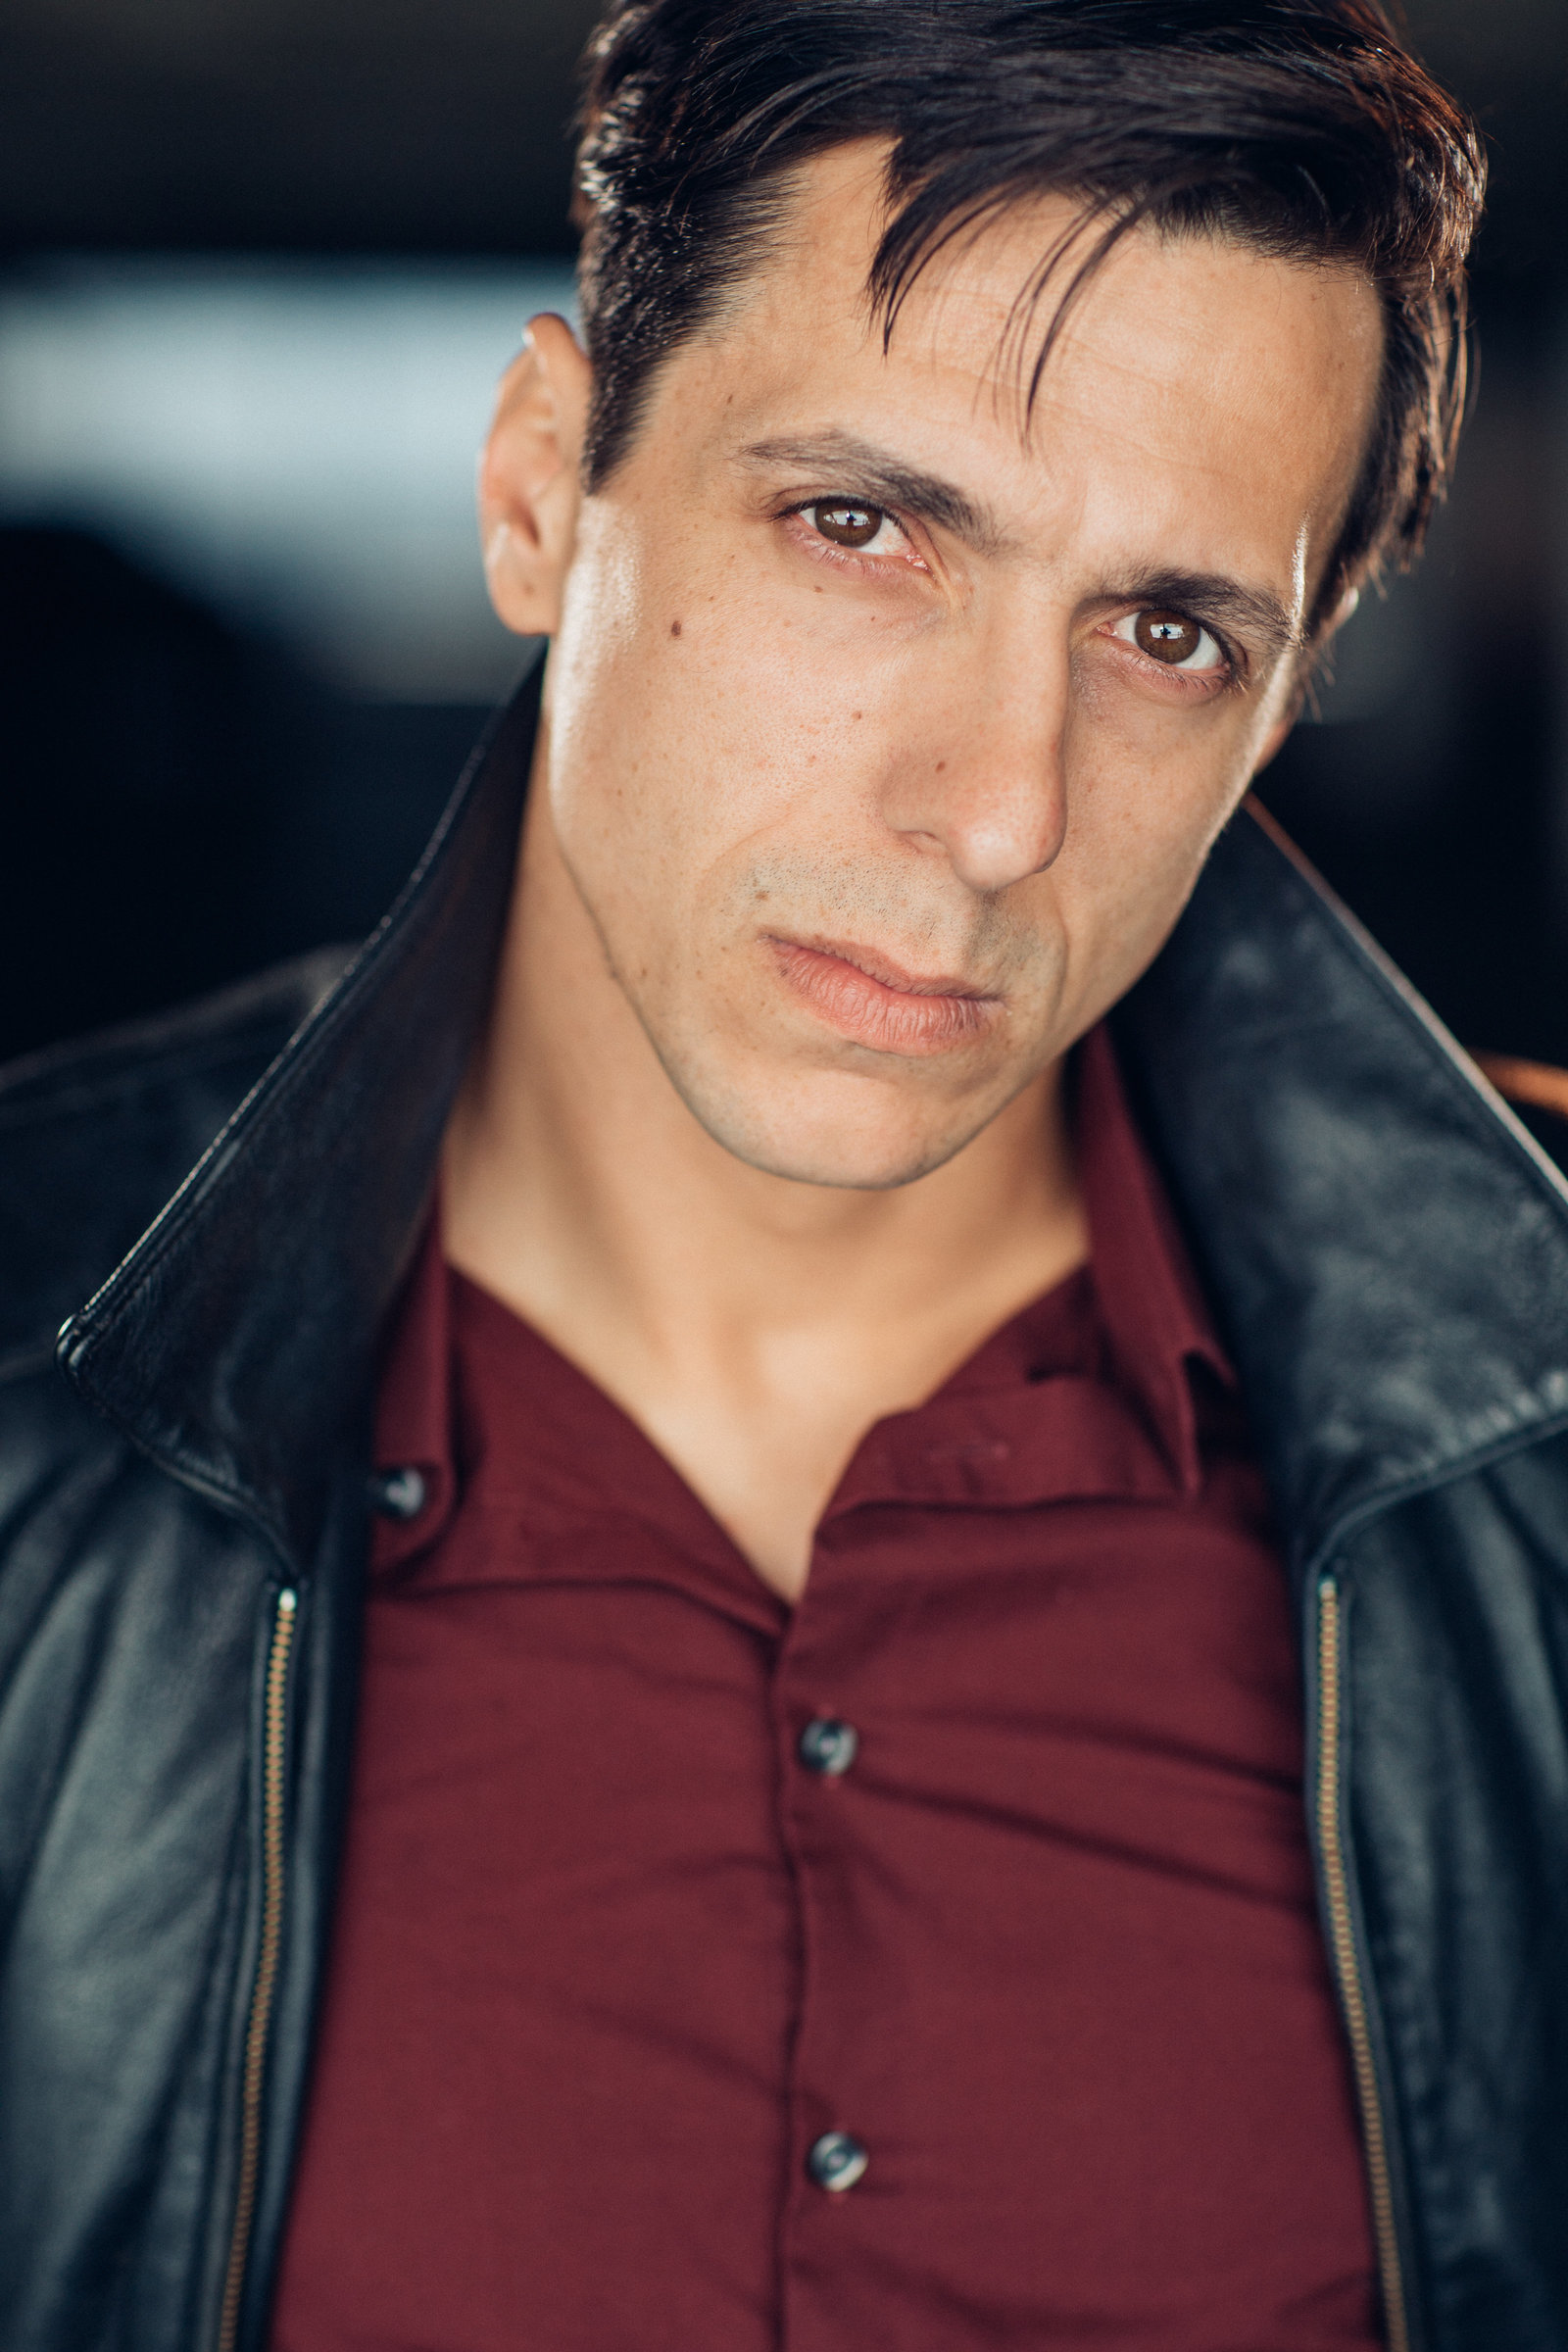 Headshot Photo Of Man In Balck Leather Jacket And Maroon Polo